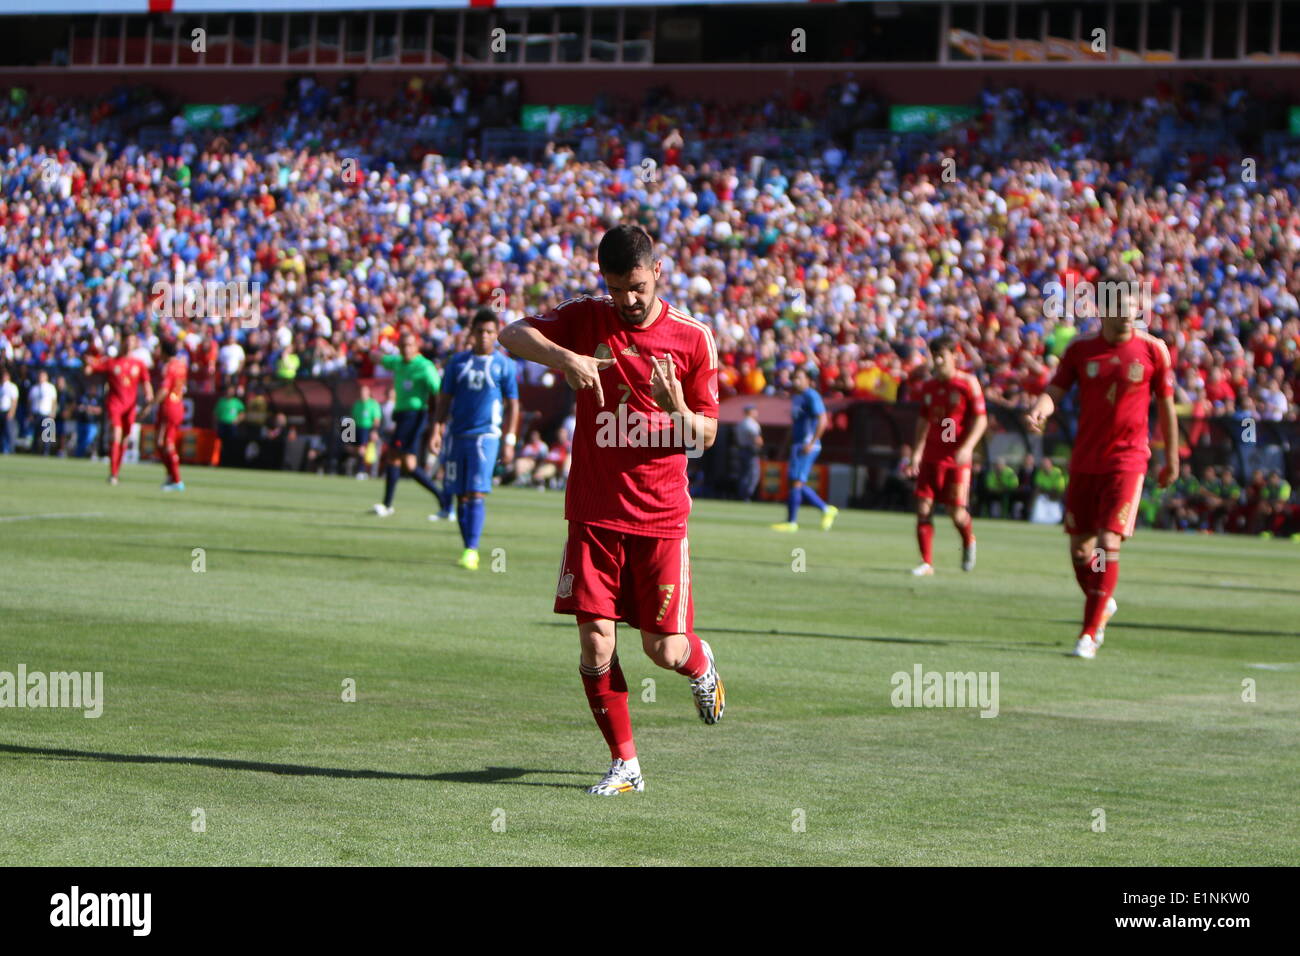 Washington, D.C, USA. 07th June, 2014. World Cup Soccer Warm up between Spain and El Salvador. Spain win 2-0, Goals by Spain # 7 David Villa.David Villa celebrates after scoring his first of two goals. Credit:  Khamp Sykhammountry/Alamy Live News Stock Photo